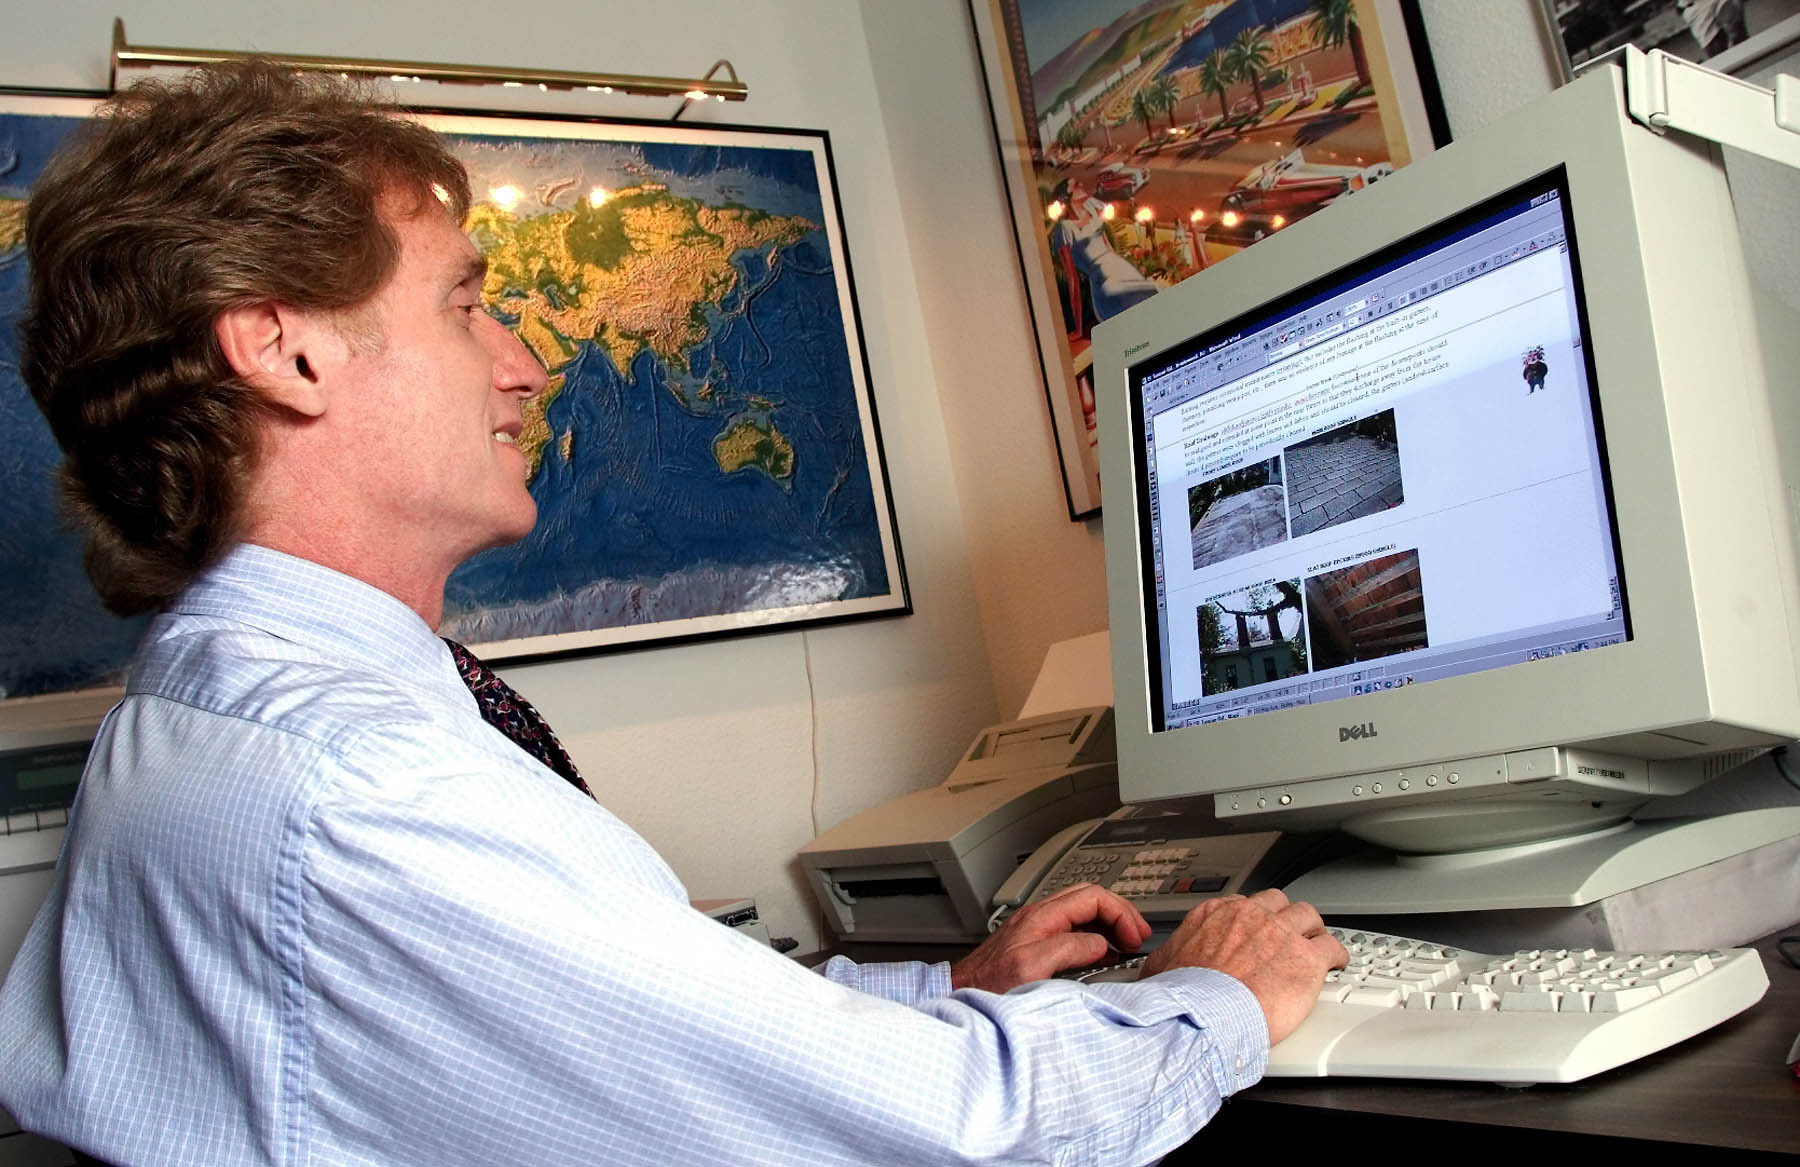 John H. Moss, the owner of Inspex Building Inspections, in his home office in Jersey City